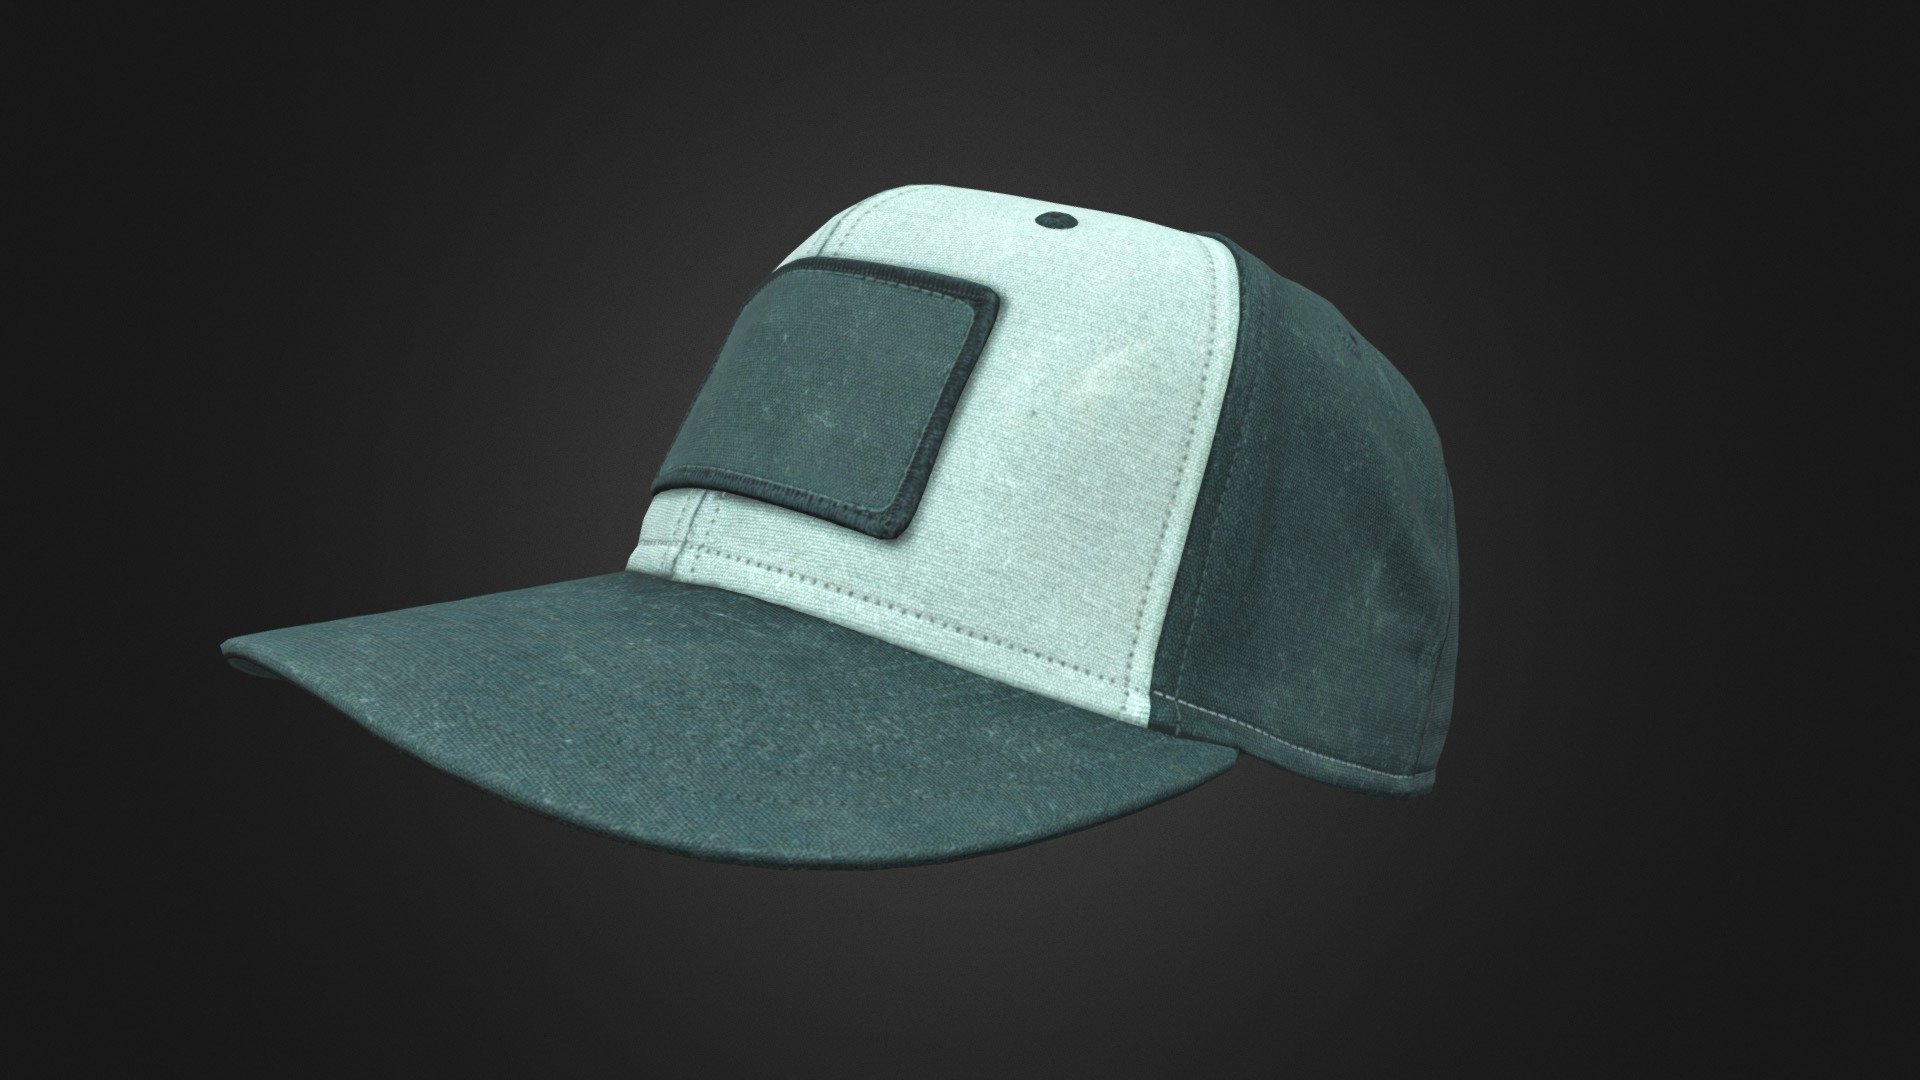 Baseball Hat
This product is an optimized model with excellent texturing for realistic and faster rendering.

The model has an optimized low poly mesh with the greatest possible number of simplifications that do not affect photo-realism but can help to simplify it, thus lightening your scene and allowing for using this model in real-time 3d applications.

Real-world accurate model. Correctly scale modeled to represent precisely like in the real world.

In this product, all objects are ERROR-FREE. All LEGAL Geometry. Subdivisions are not required for this product.

Perfect for Architectural, Product visualization, Game Engine, and VR (Virtual Reality) No Plugin Needed.

Format Type




3ds Max 2017 (with physical PBR Shader)

FBX

OBJ

3DS

You might need to re-assign textures map to model in your relevant software - Baseball Sports Hat - Buy Royalty Free 3D model by webcraft3d 3d model